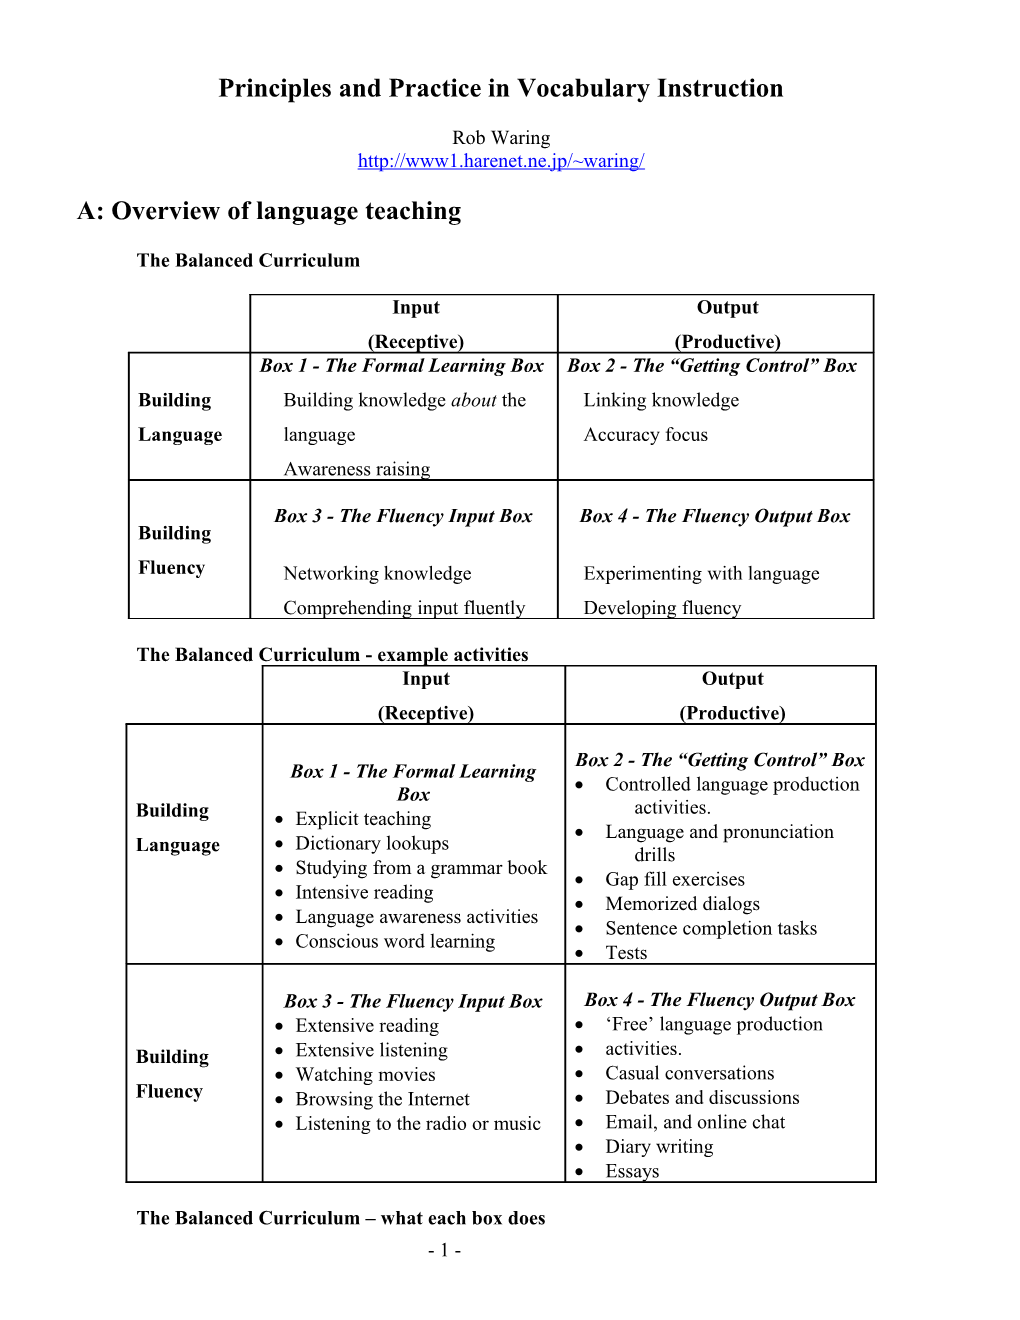 Principles and Practice in Vocabulary Teaching